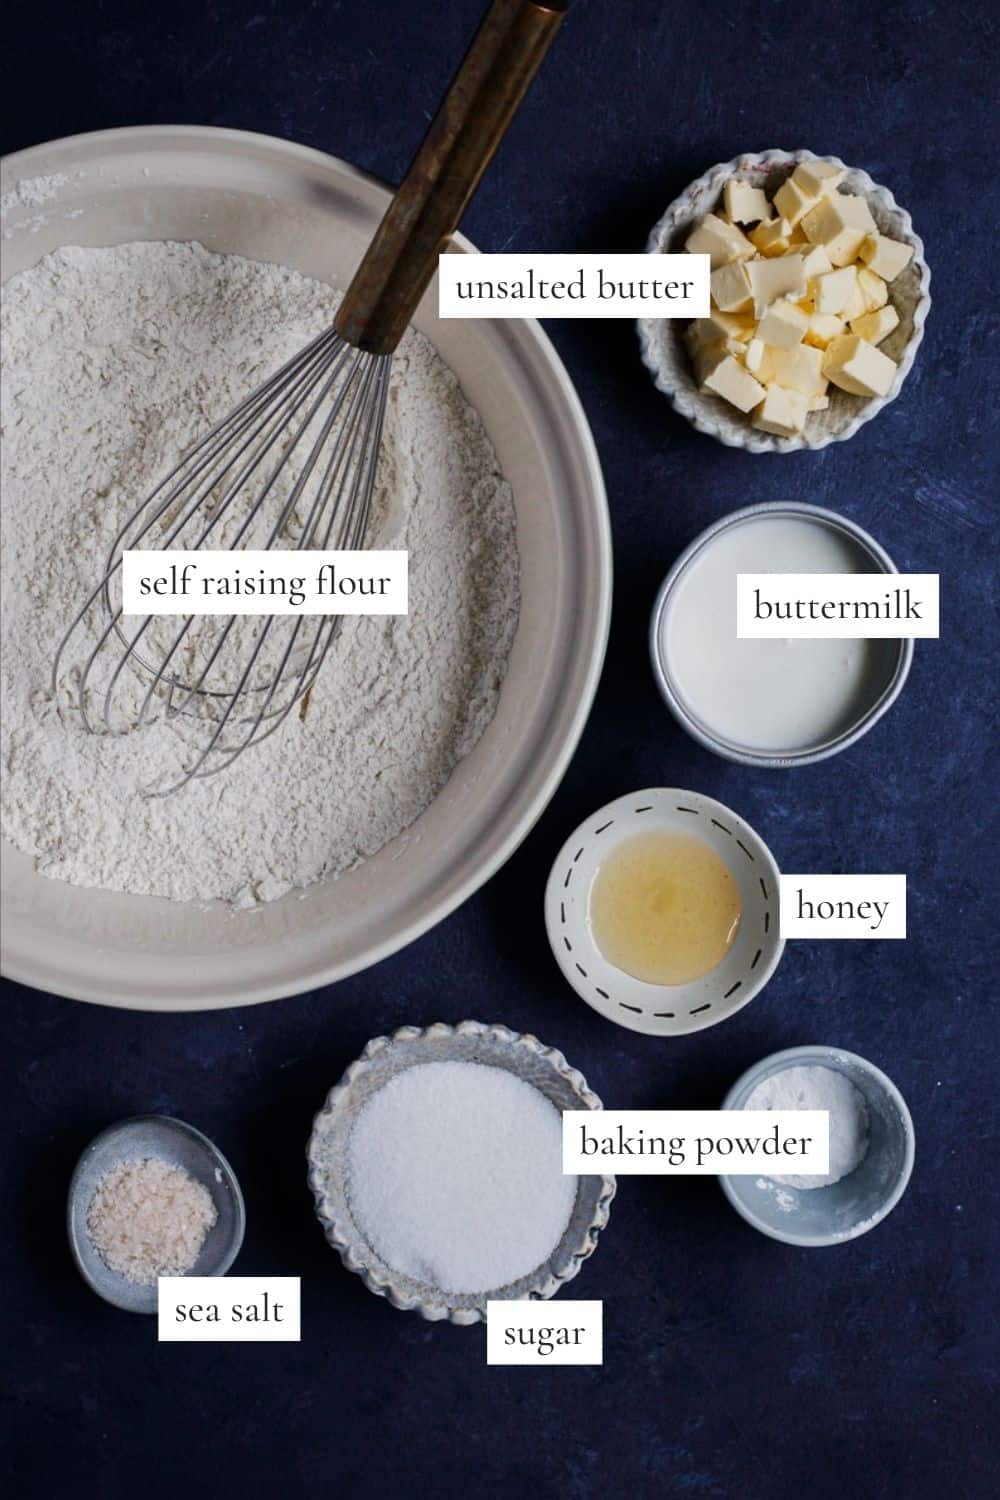 All the ingredients you need to make this Irish buttermilk scones recipe.